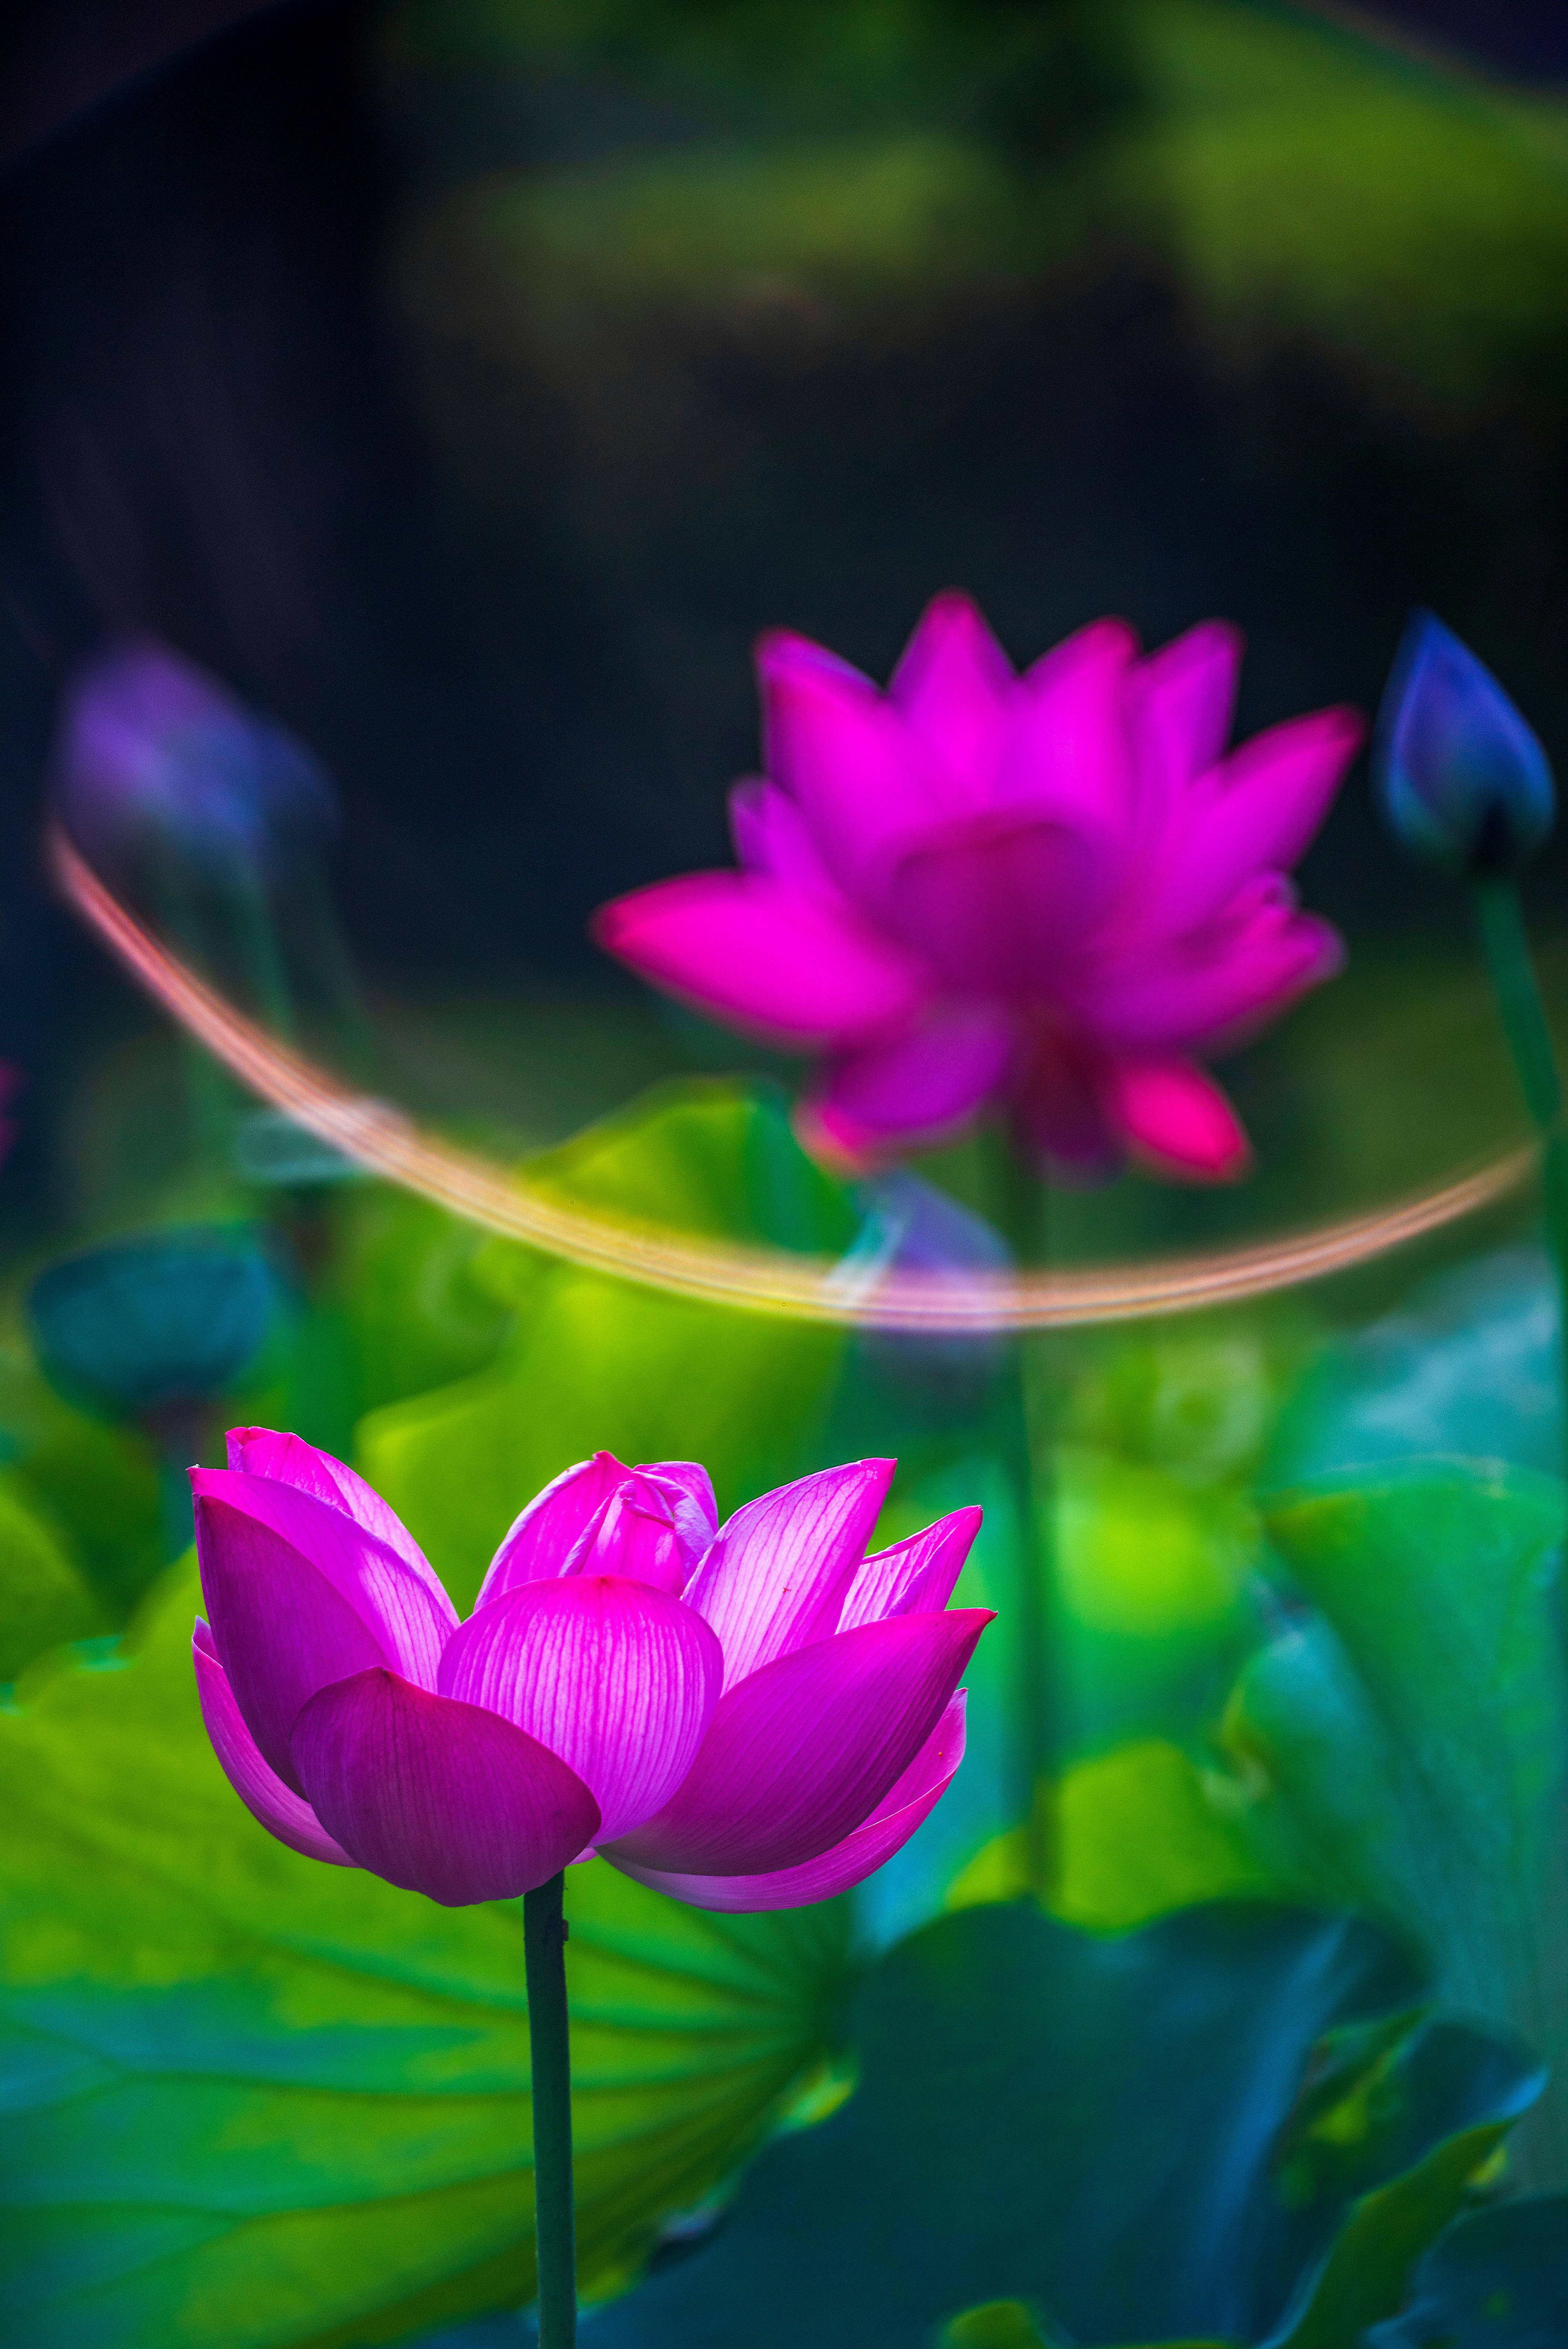 Pink Lotus Flower in Close Up Photography · Free Stock Photo